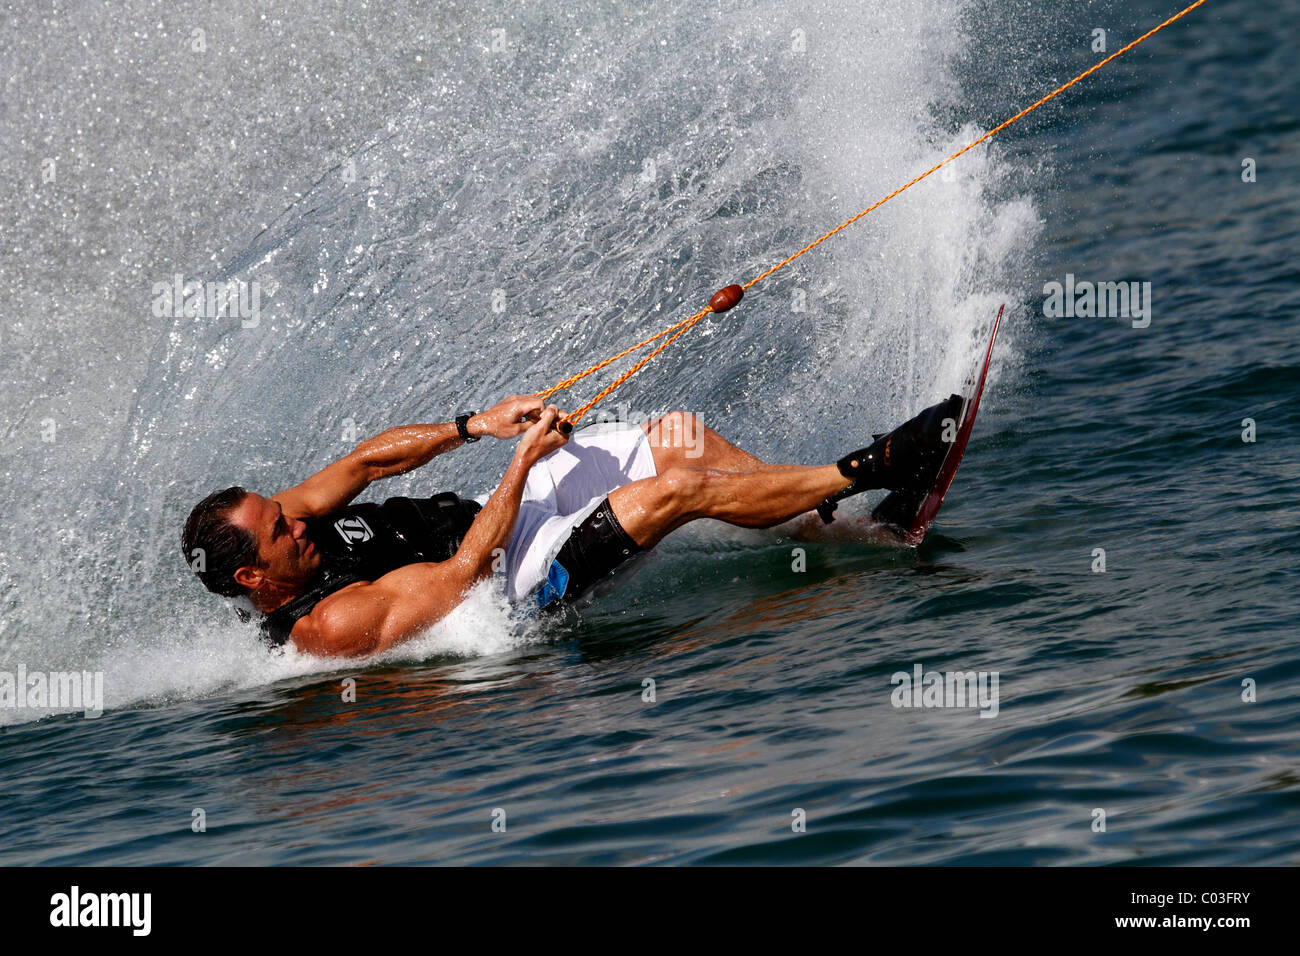 Surfer with wakeboard, Nordstrand lake near Erfurt, Thuringia, Germany, Europe Stock Photo